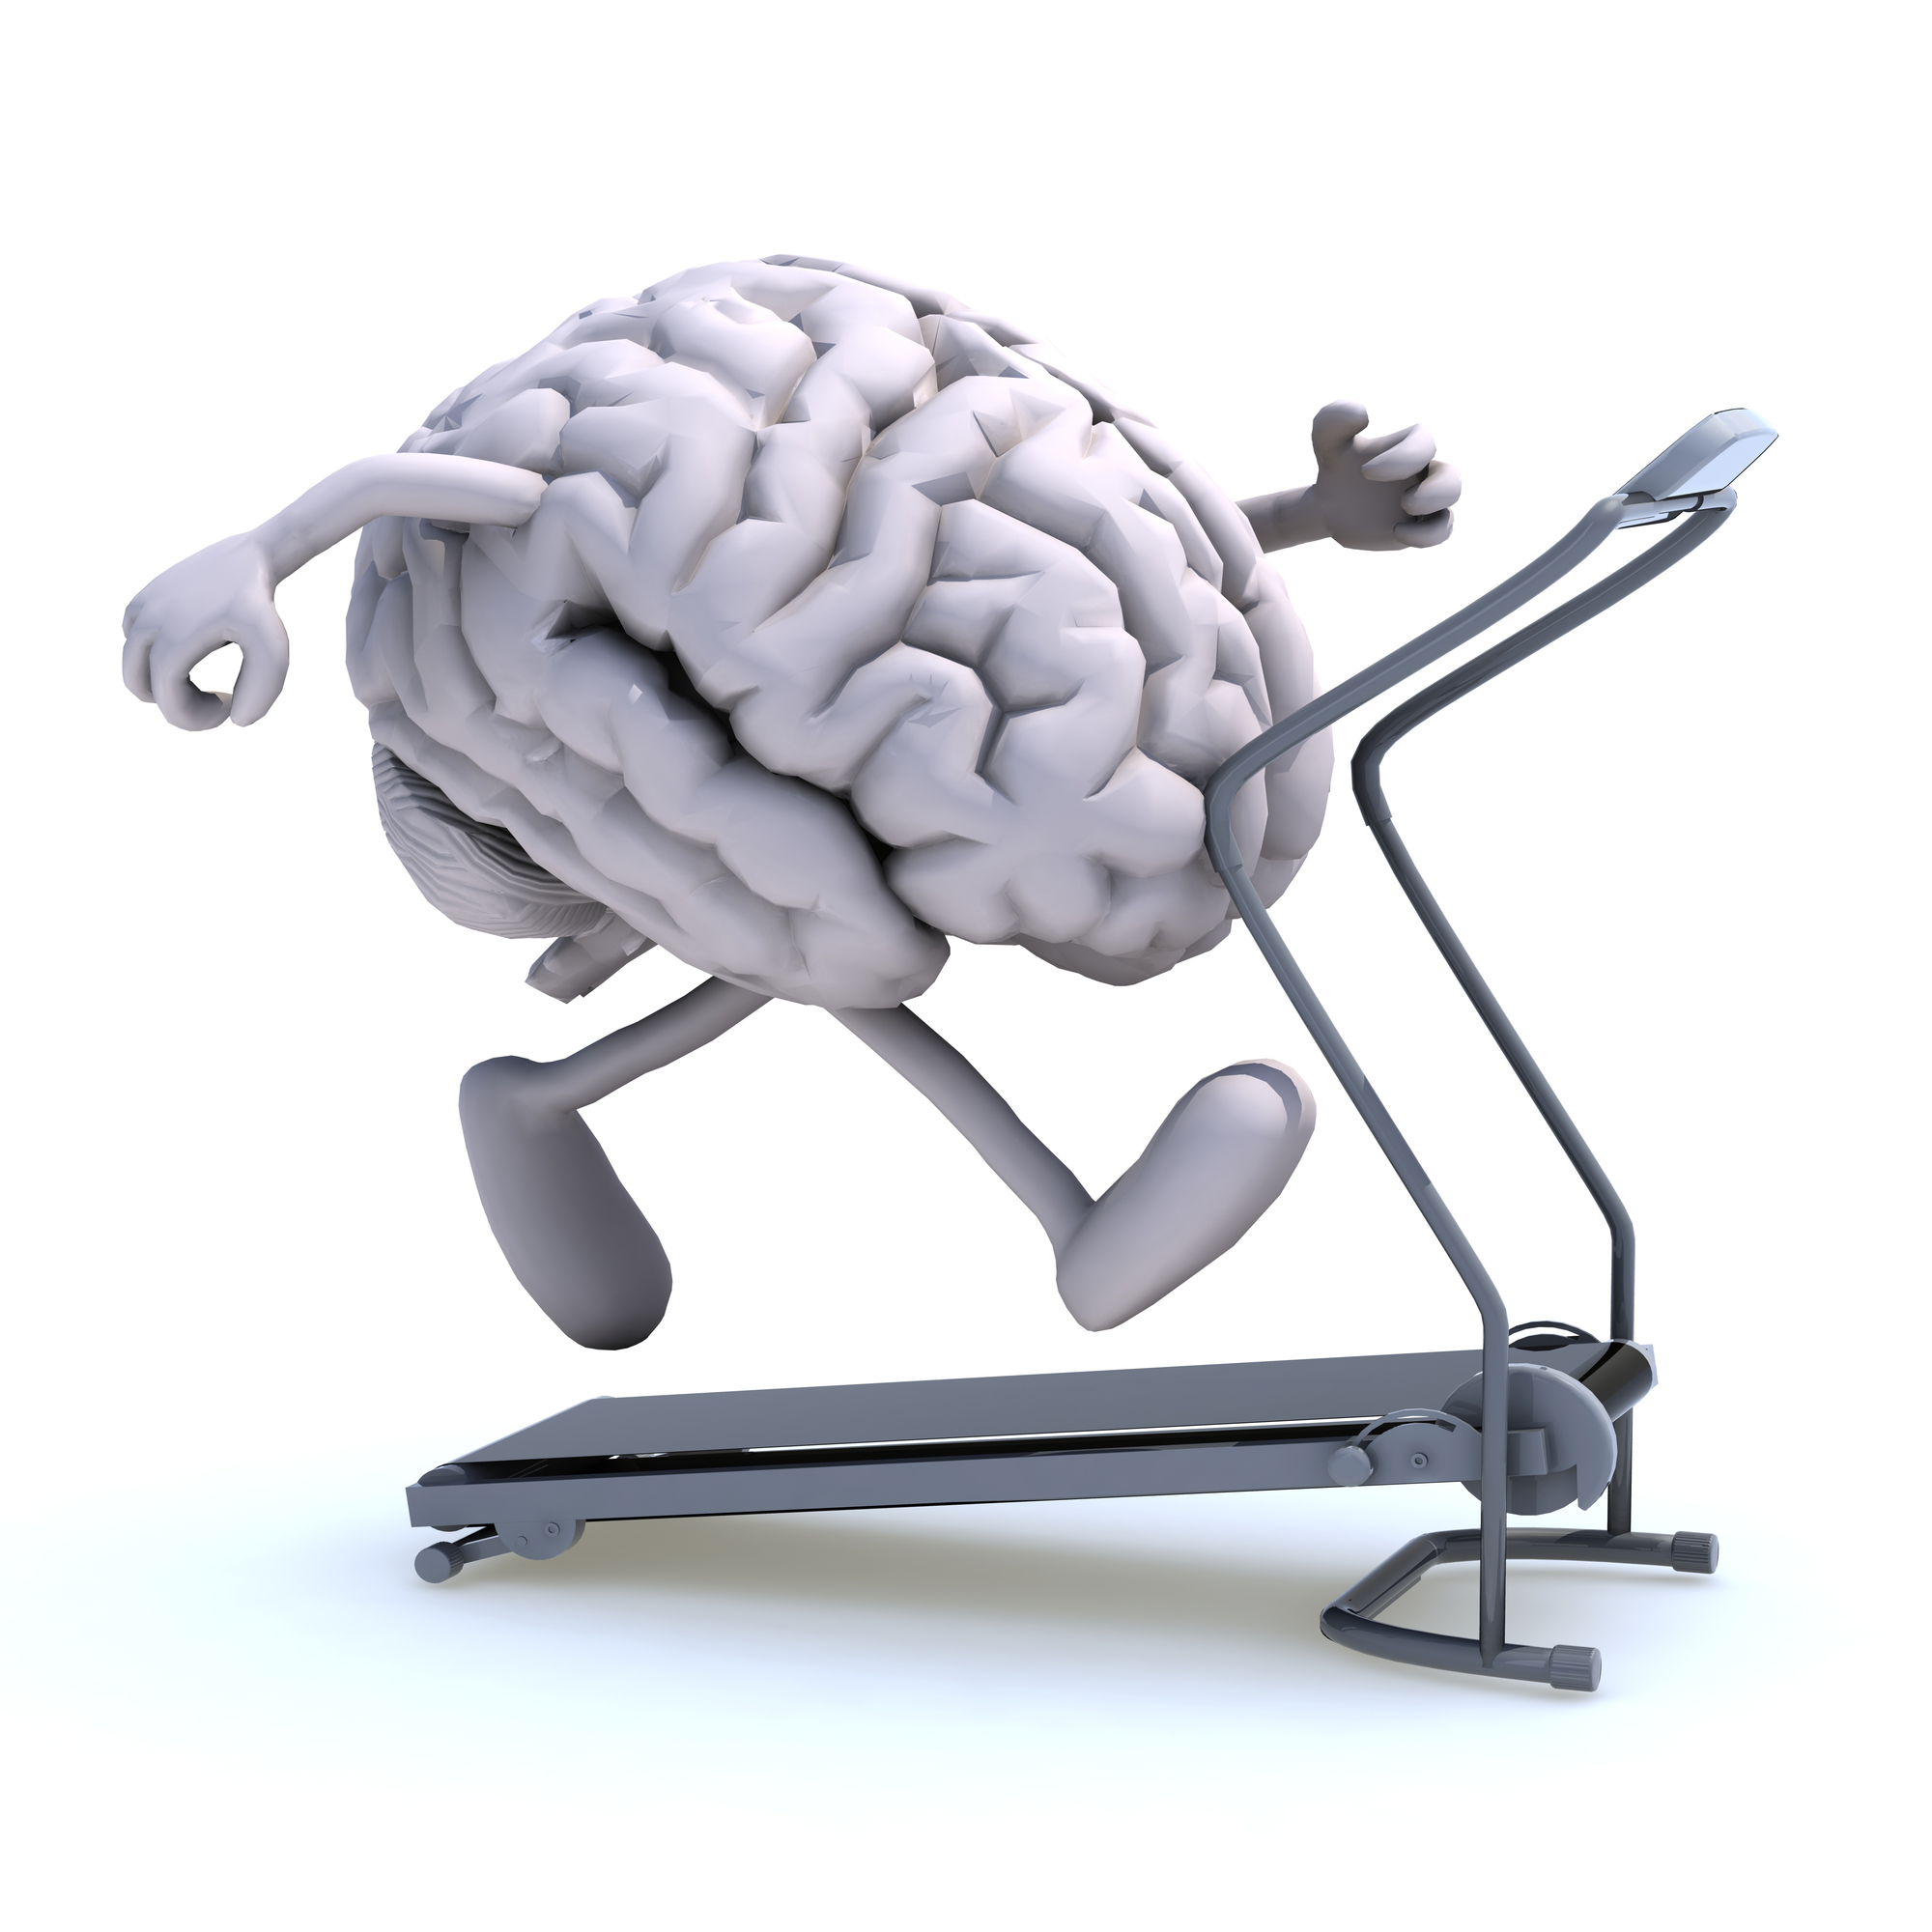 Image of a brain working out, what American escape rooms offer, a mindful experience. 